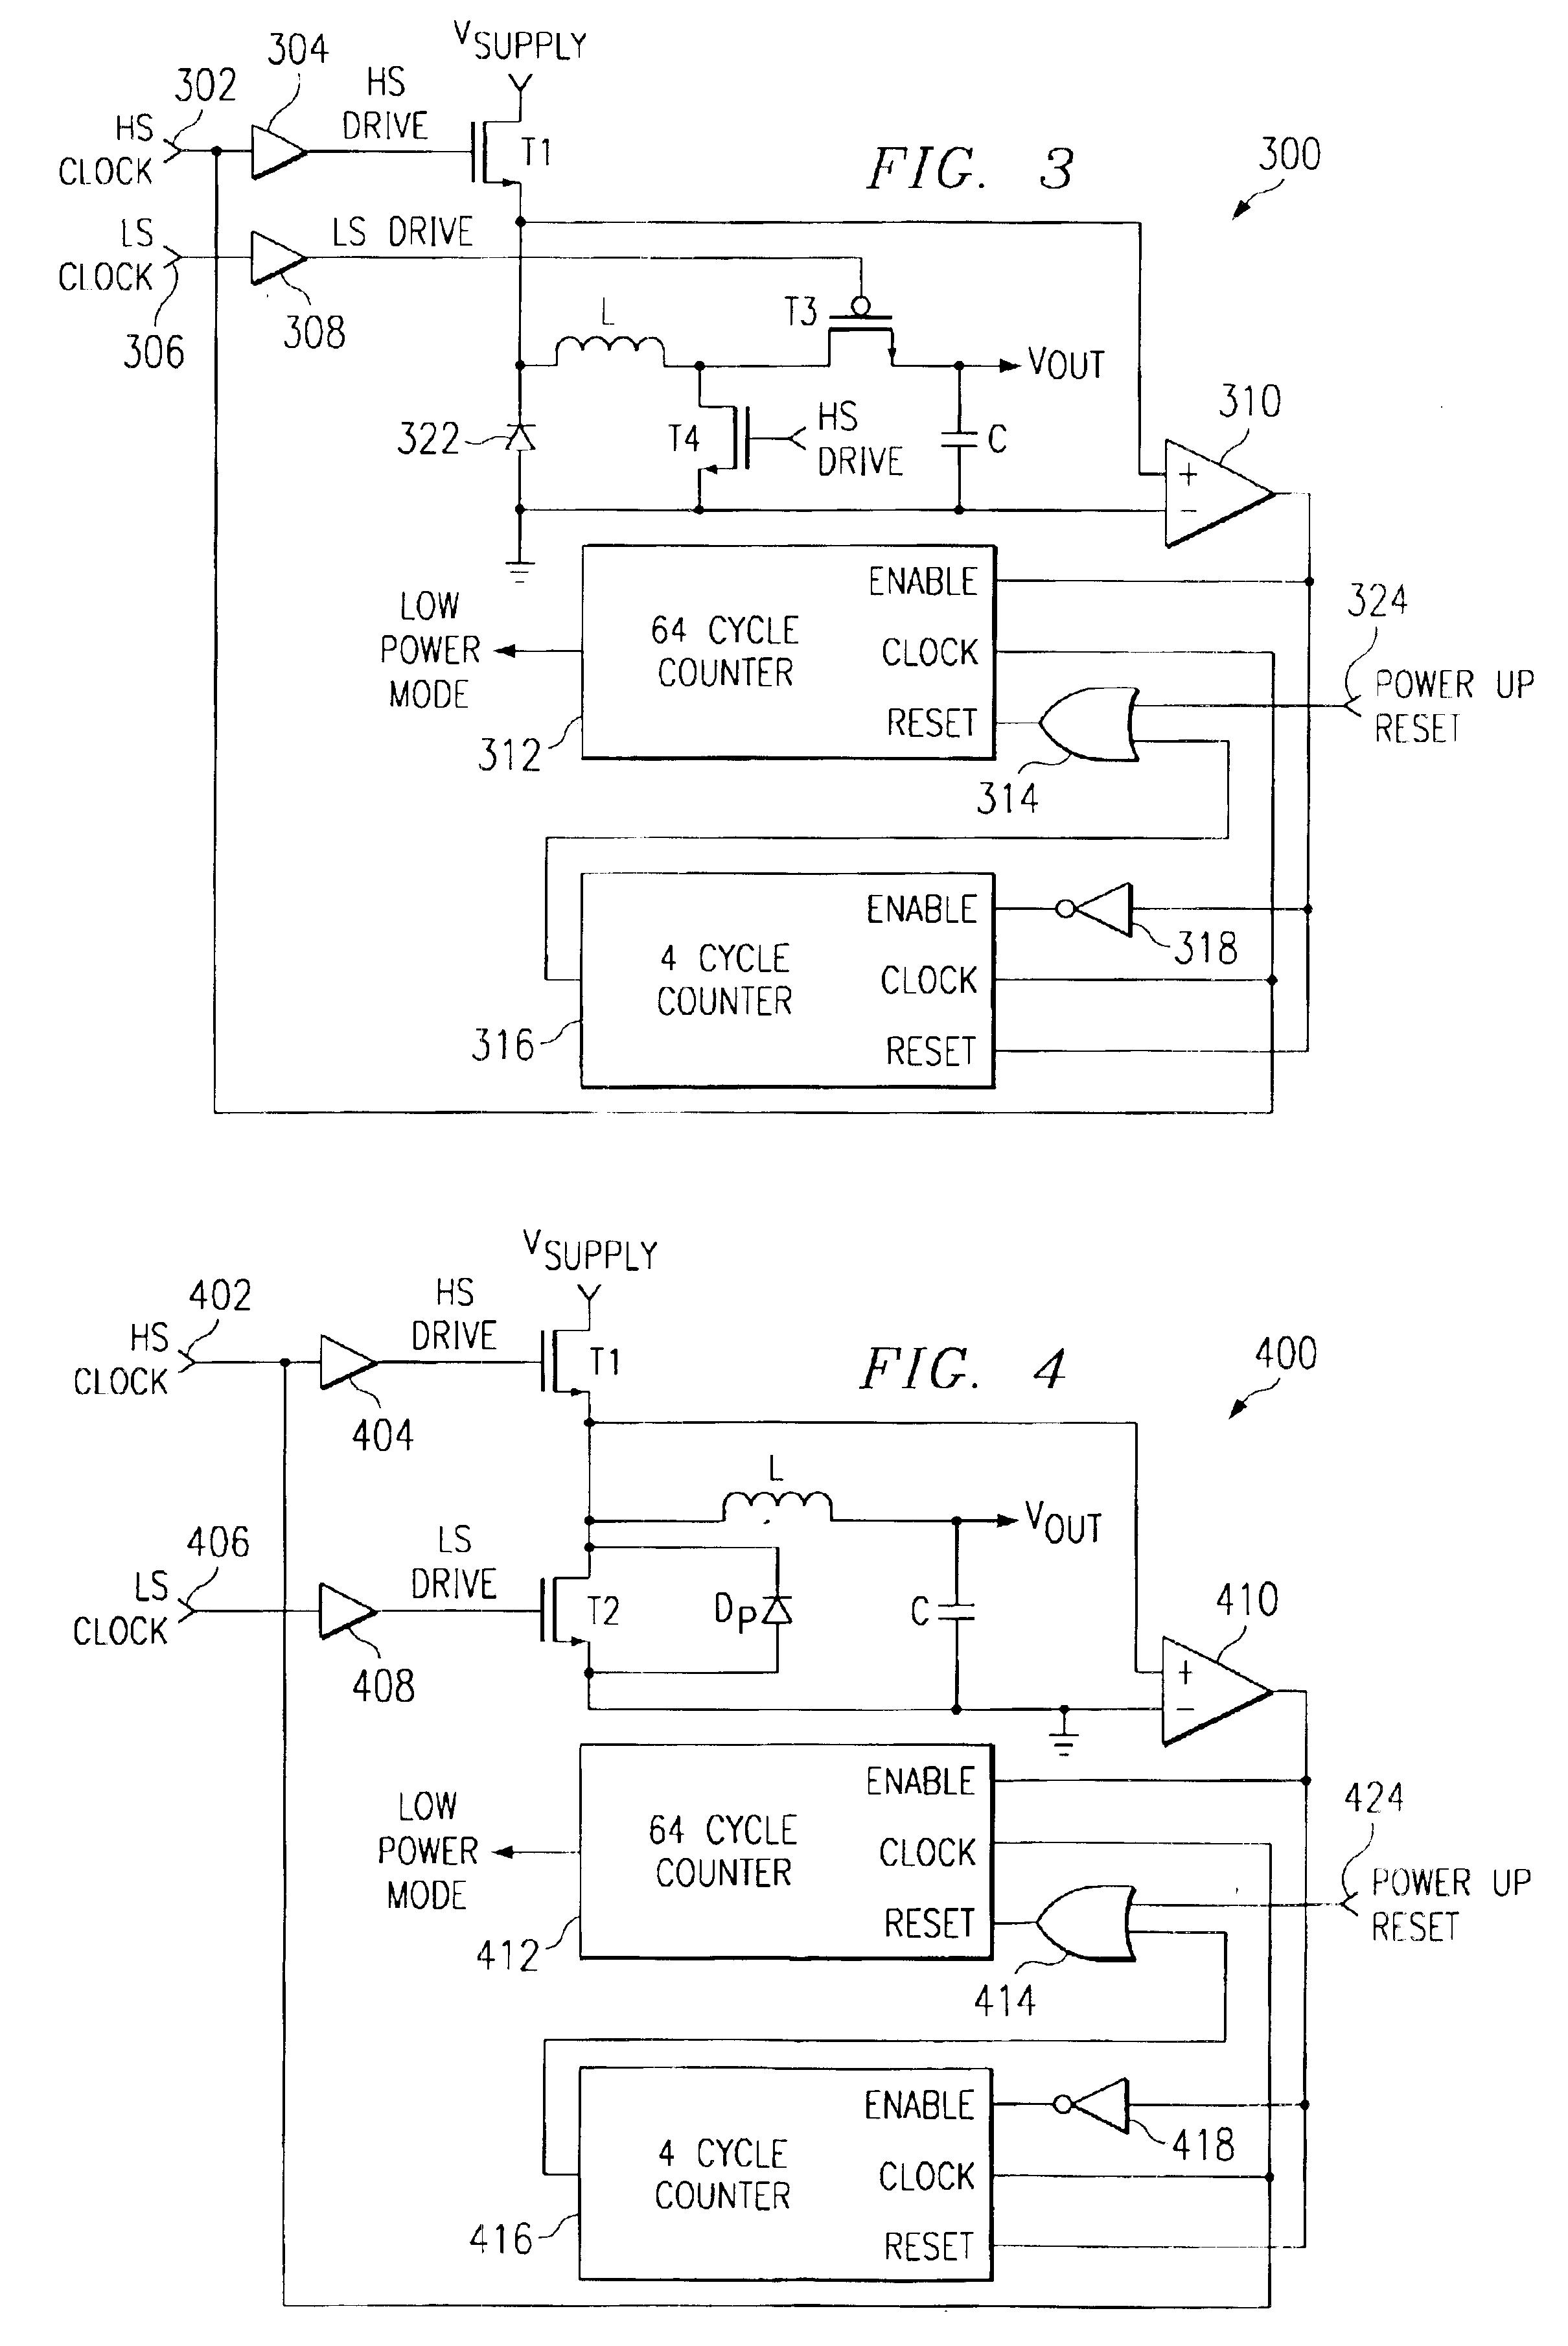 Low power mode detection circuit for a DC/DC converter